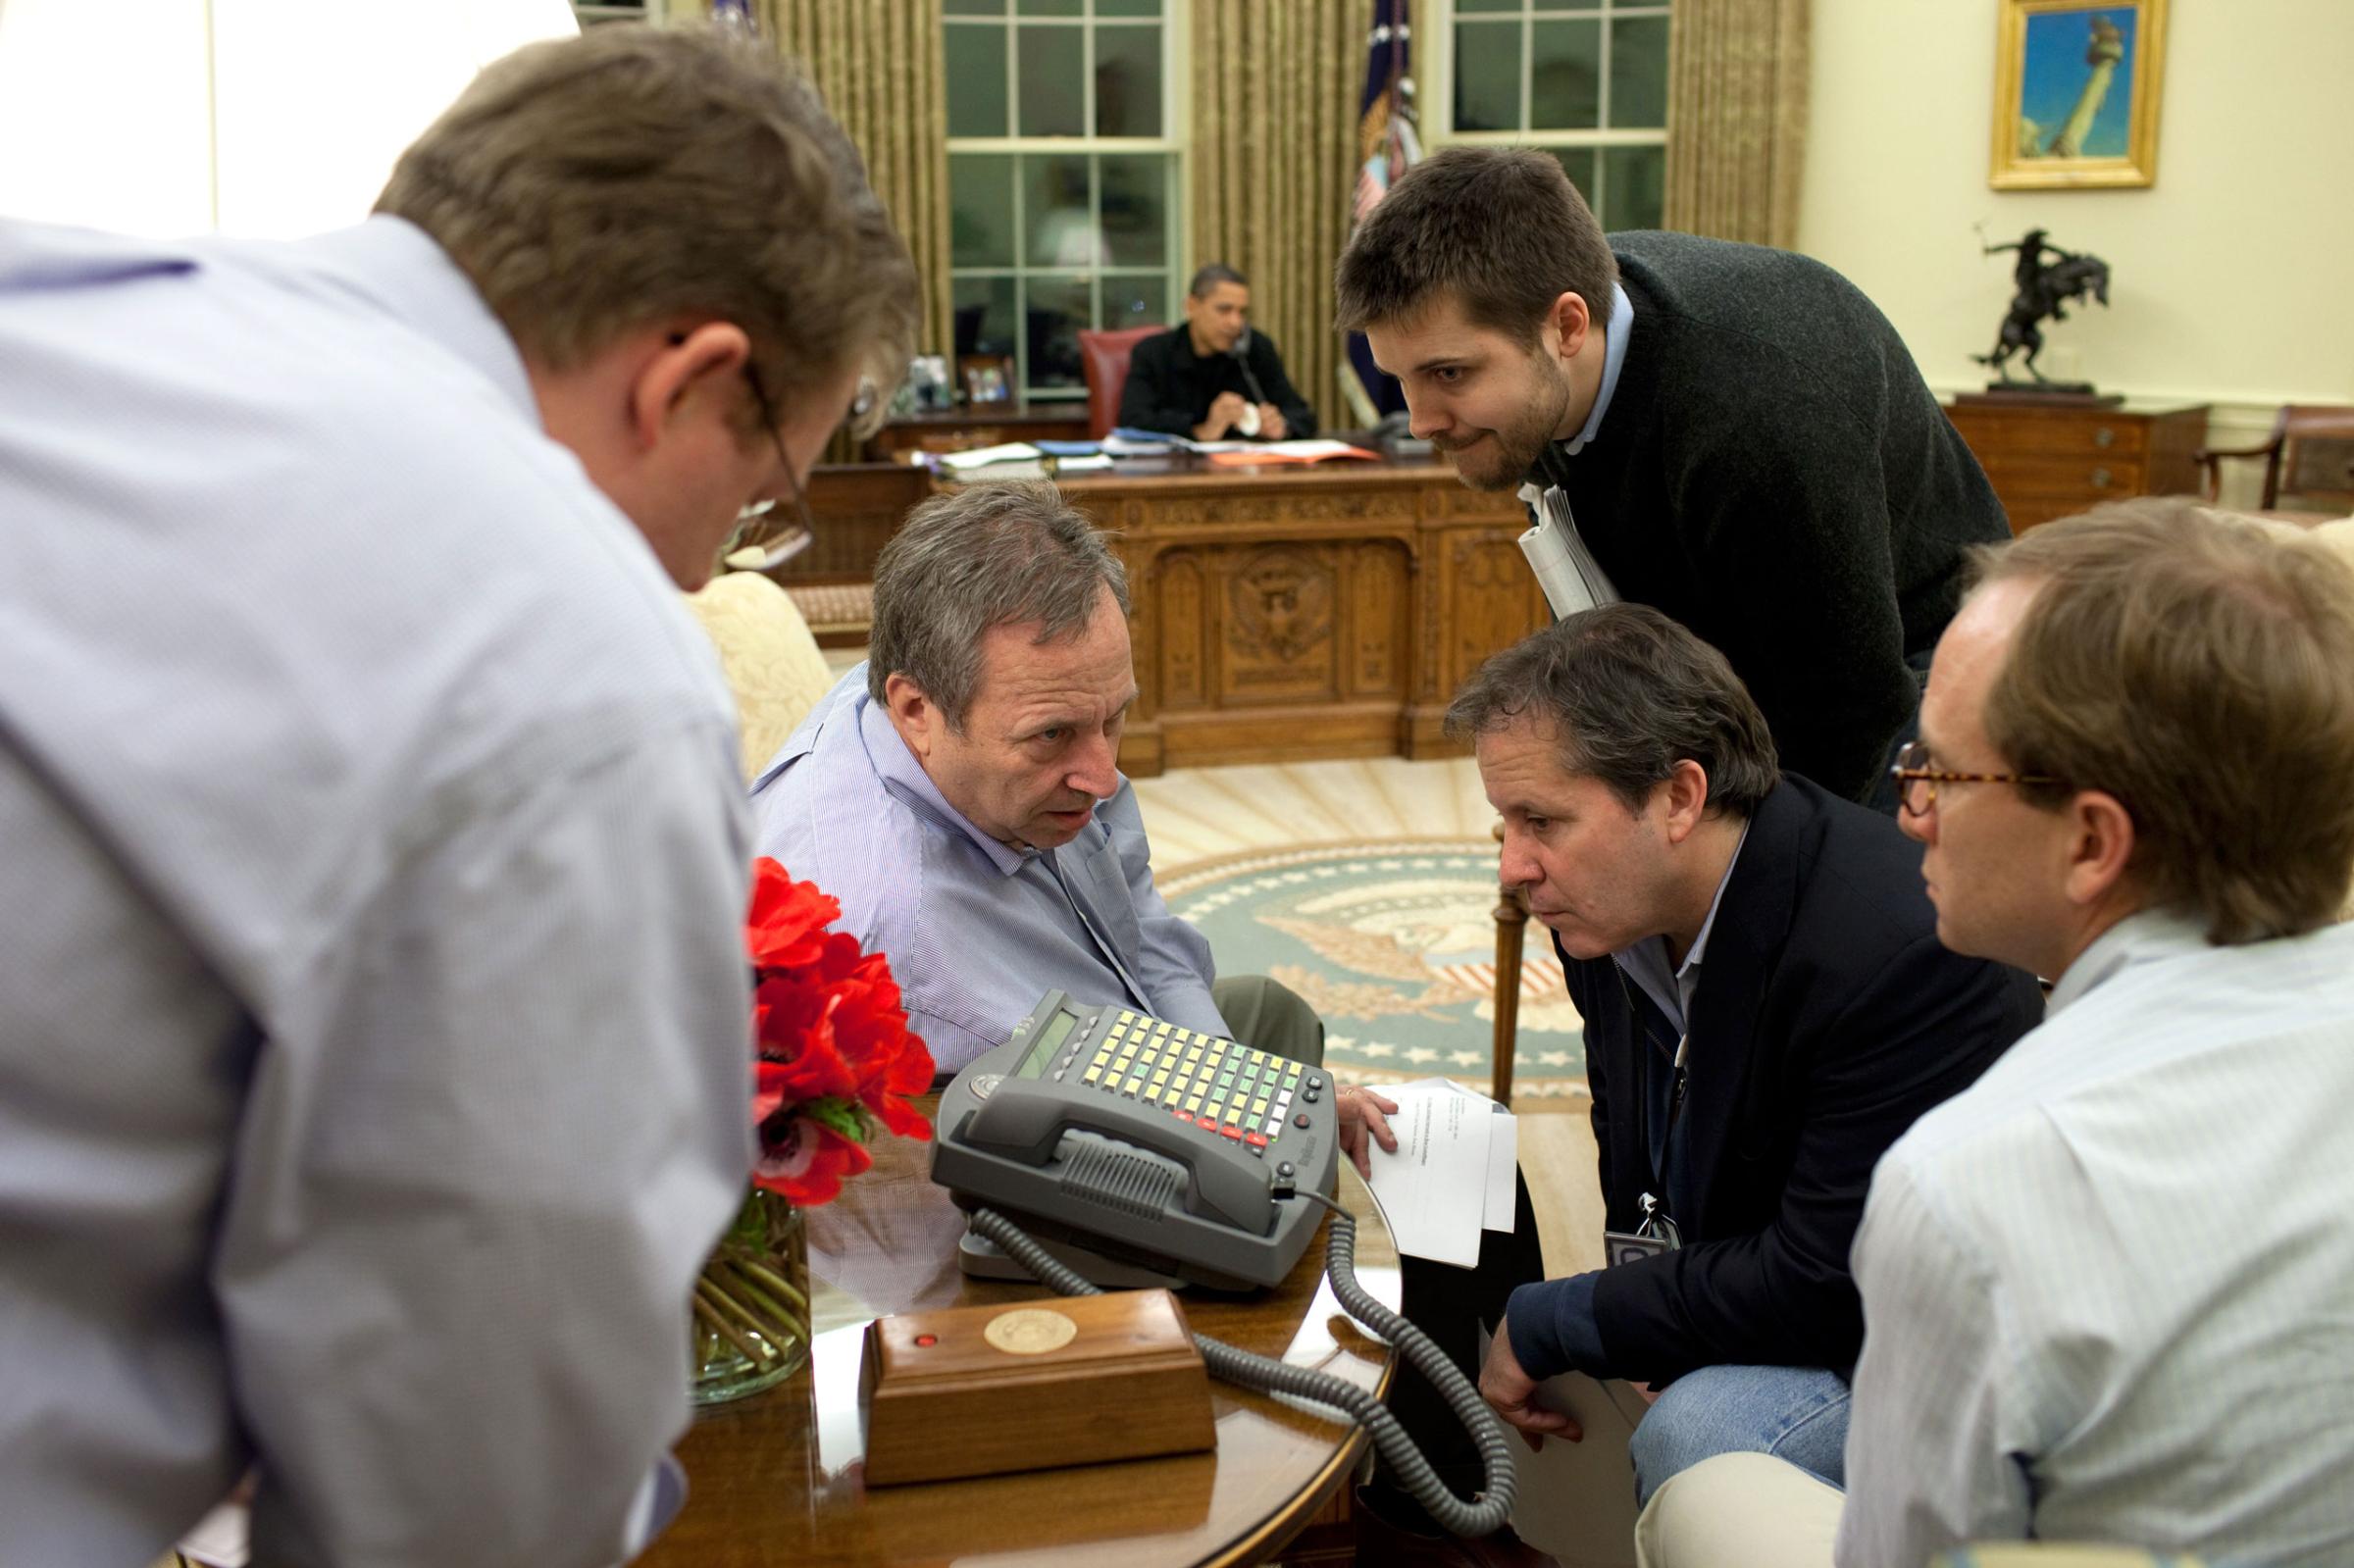 On Sunday night, March 29, 2009, aides listen to a speaker phone as the President made calls to alert officials about his plan to set deadlines for General Motors and Chrysler overhauls that were to be announced the next day.